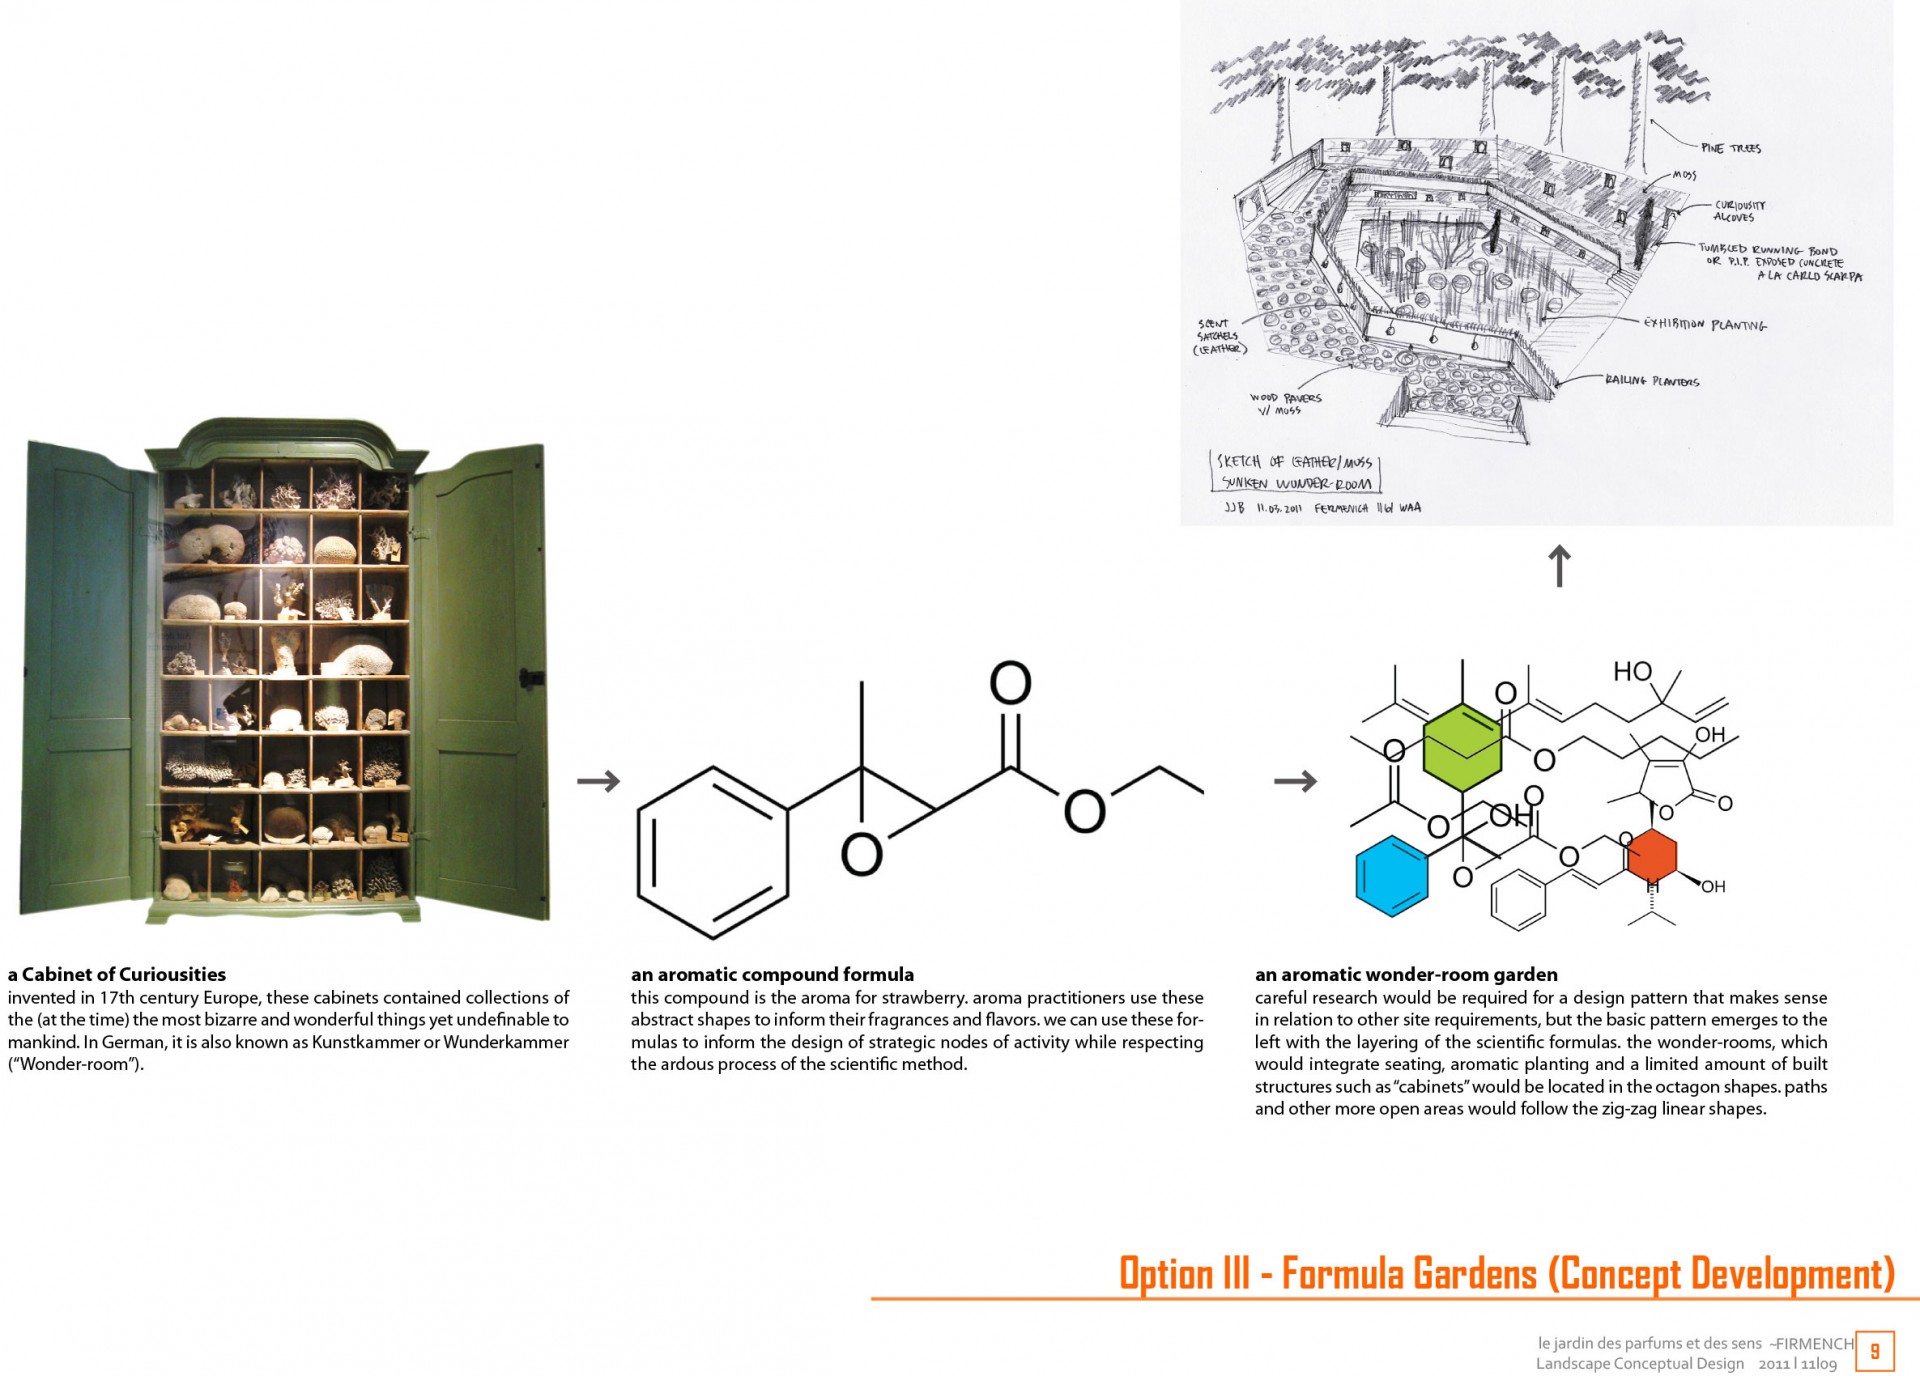 The Formula Garden is based on the chemical formulas of certain scents.